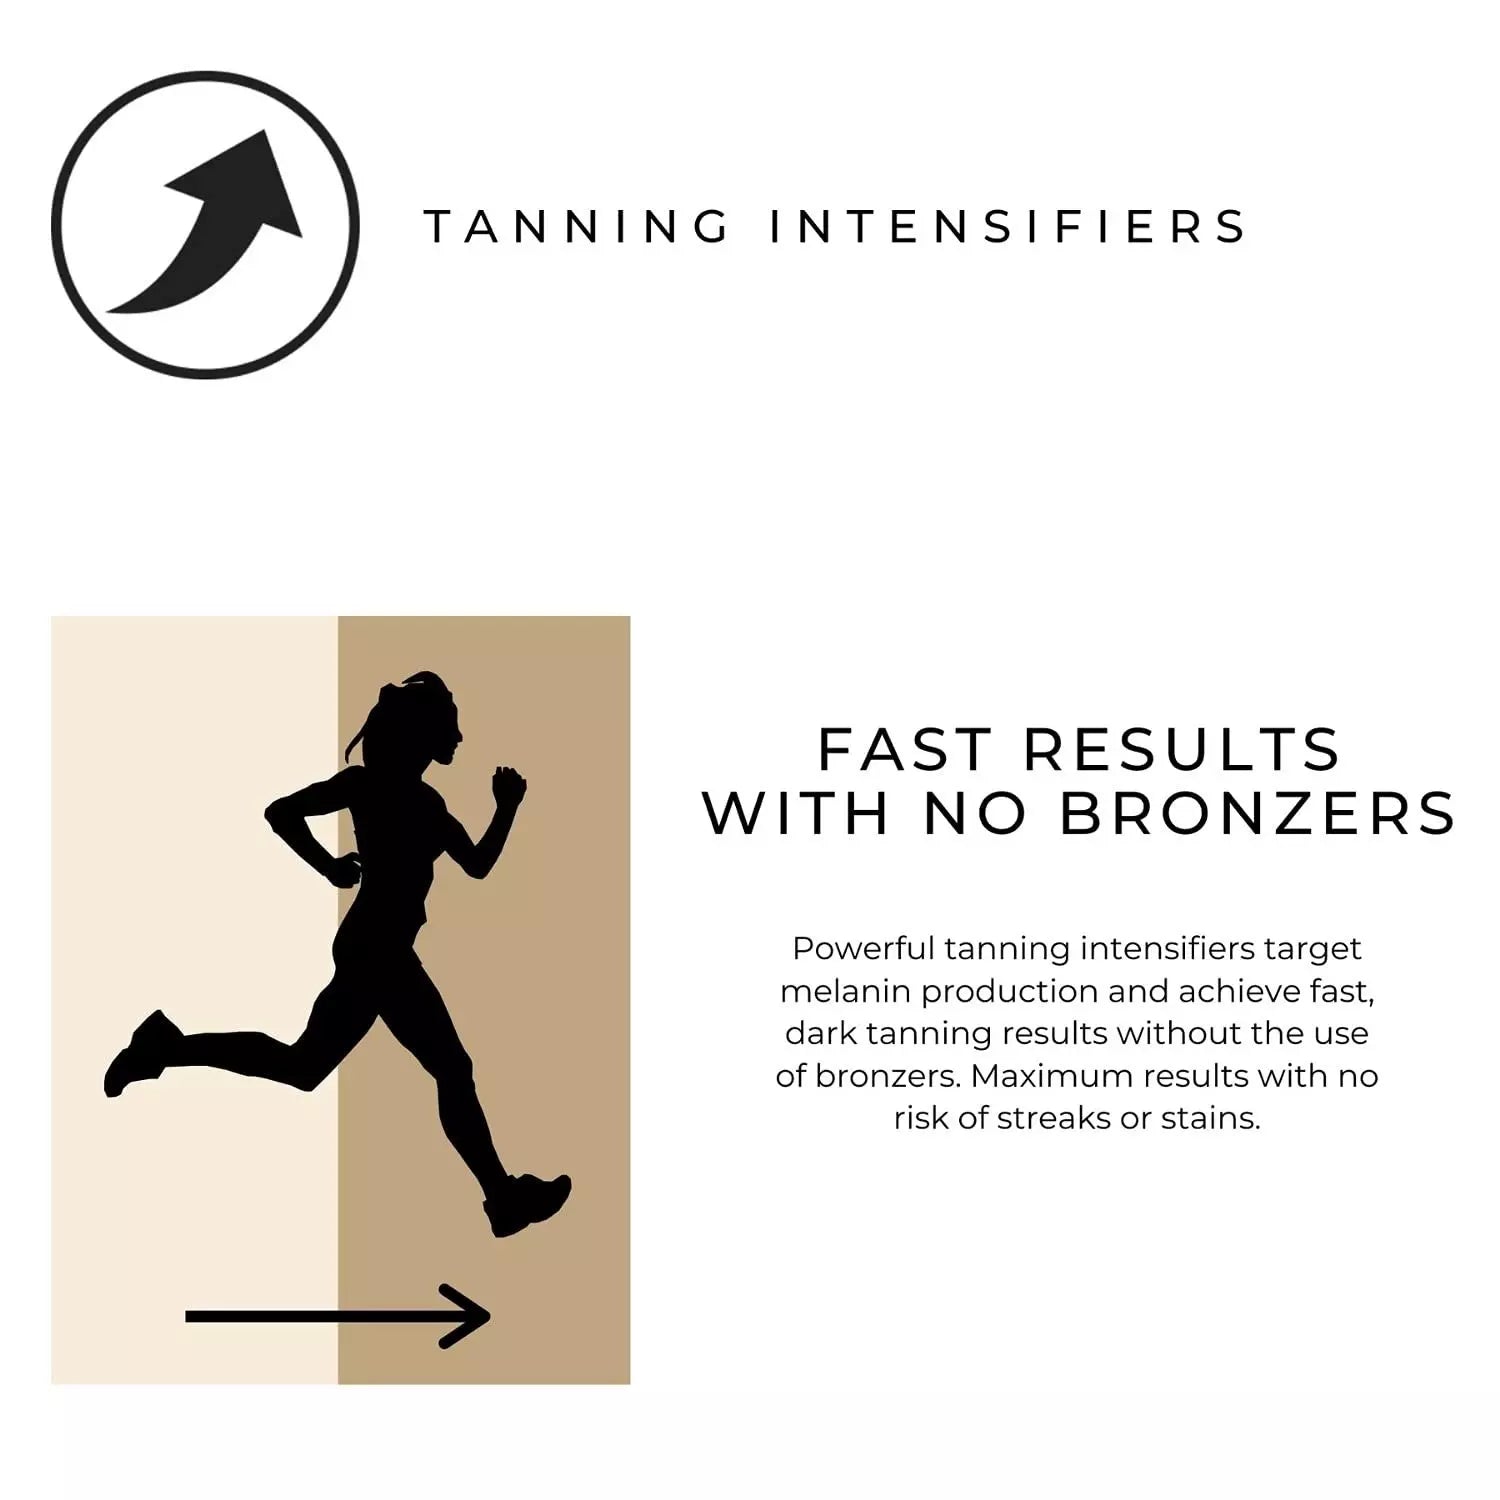 Tanning intensifier - how to tan?